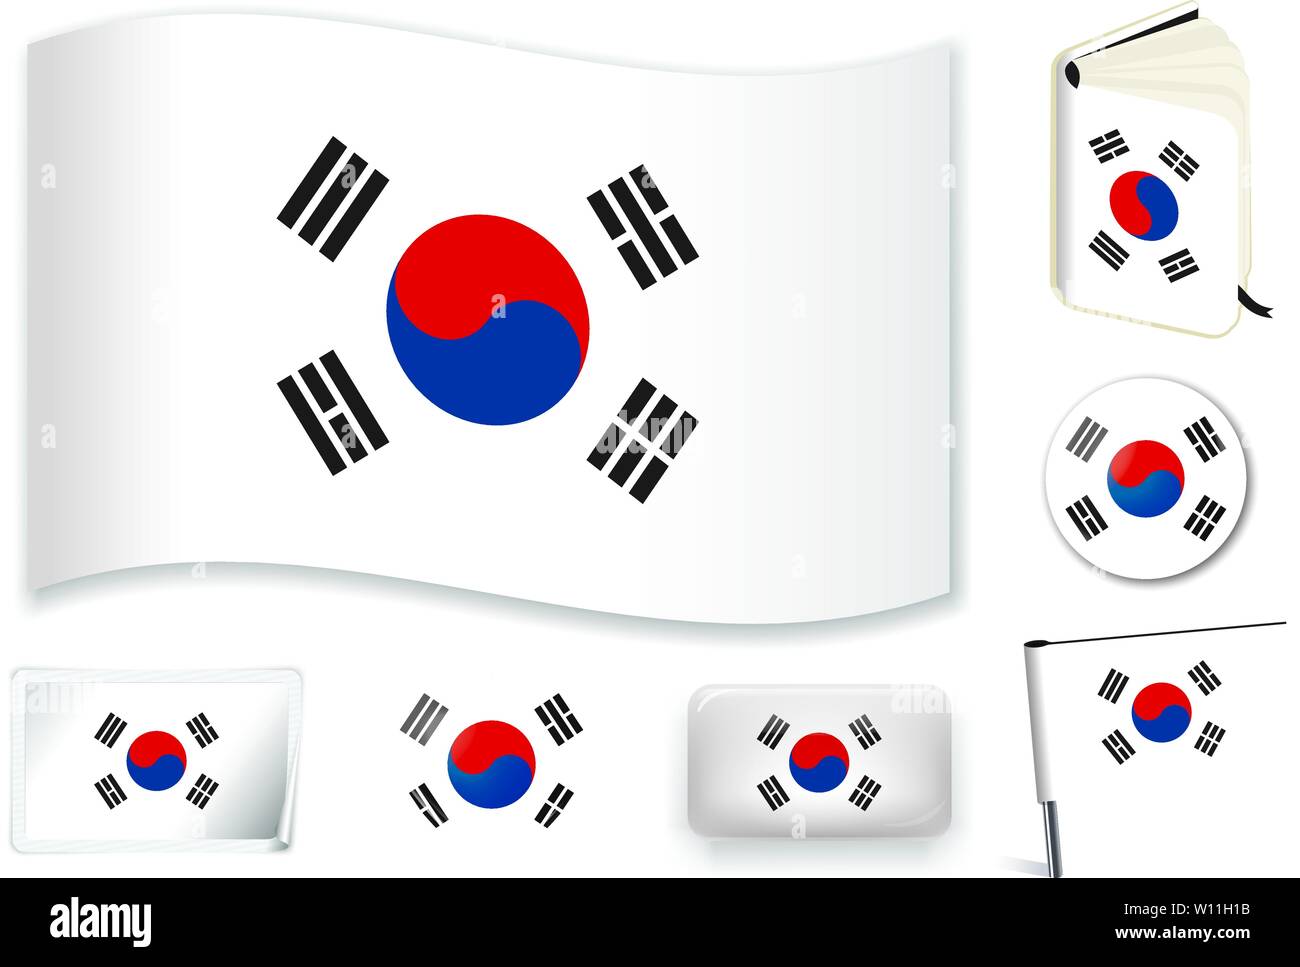 South Korea. South Korean national flag. Vector illustration. 3 layers. Shadows, flat flag, lights and shadows. Collection of 220 world flags. Accurate colors. Easy changes. Stock Vector